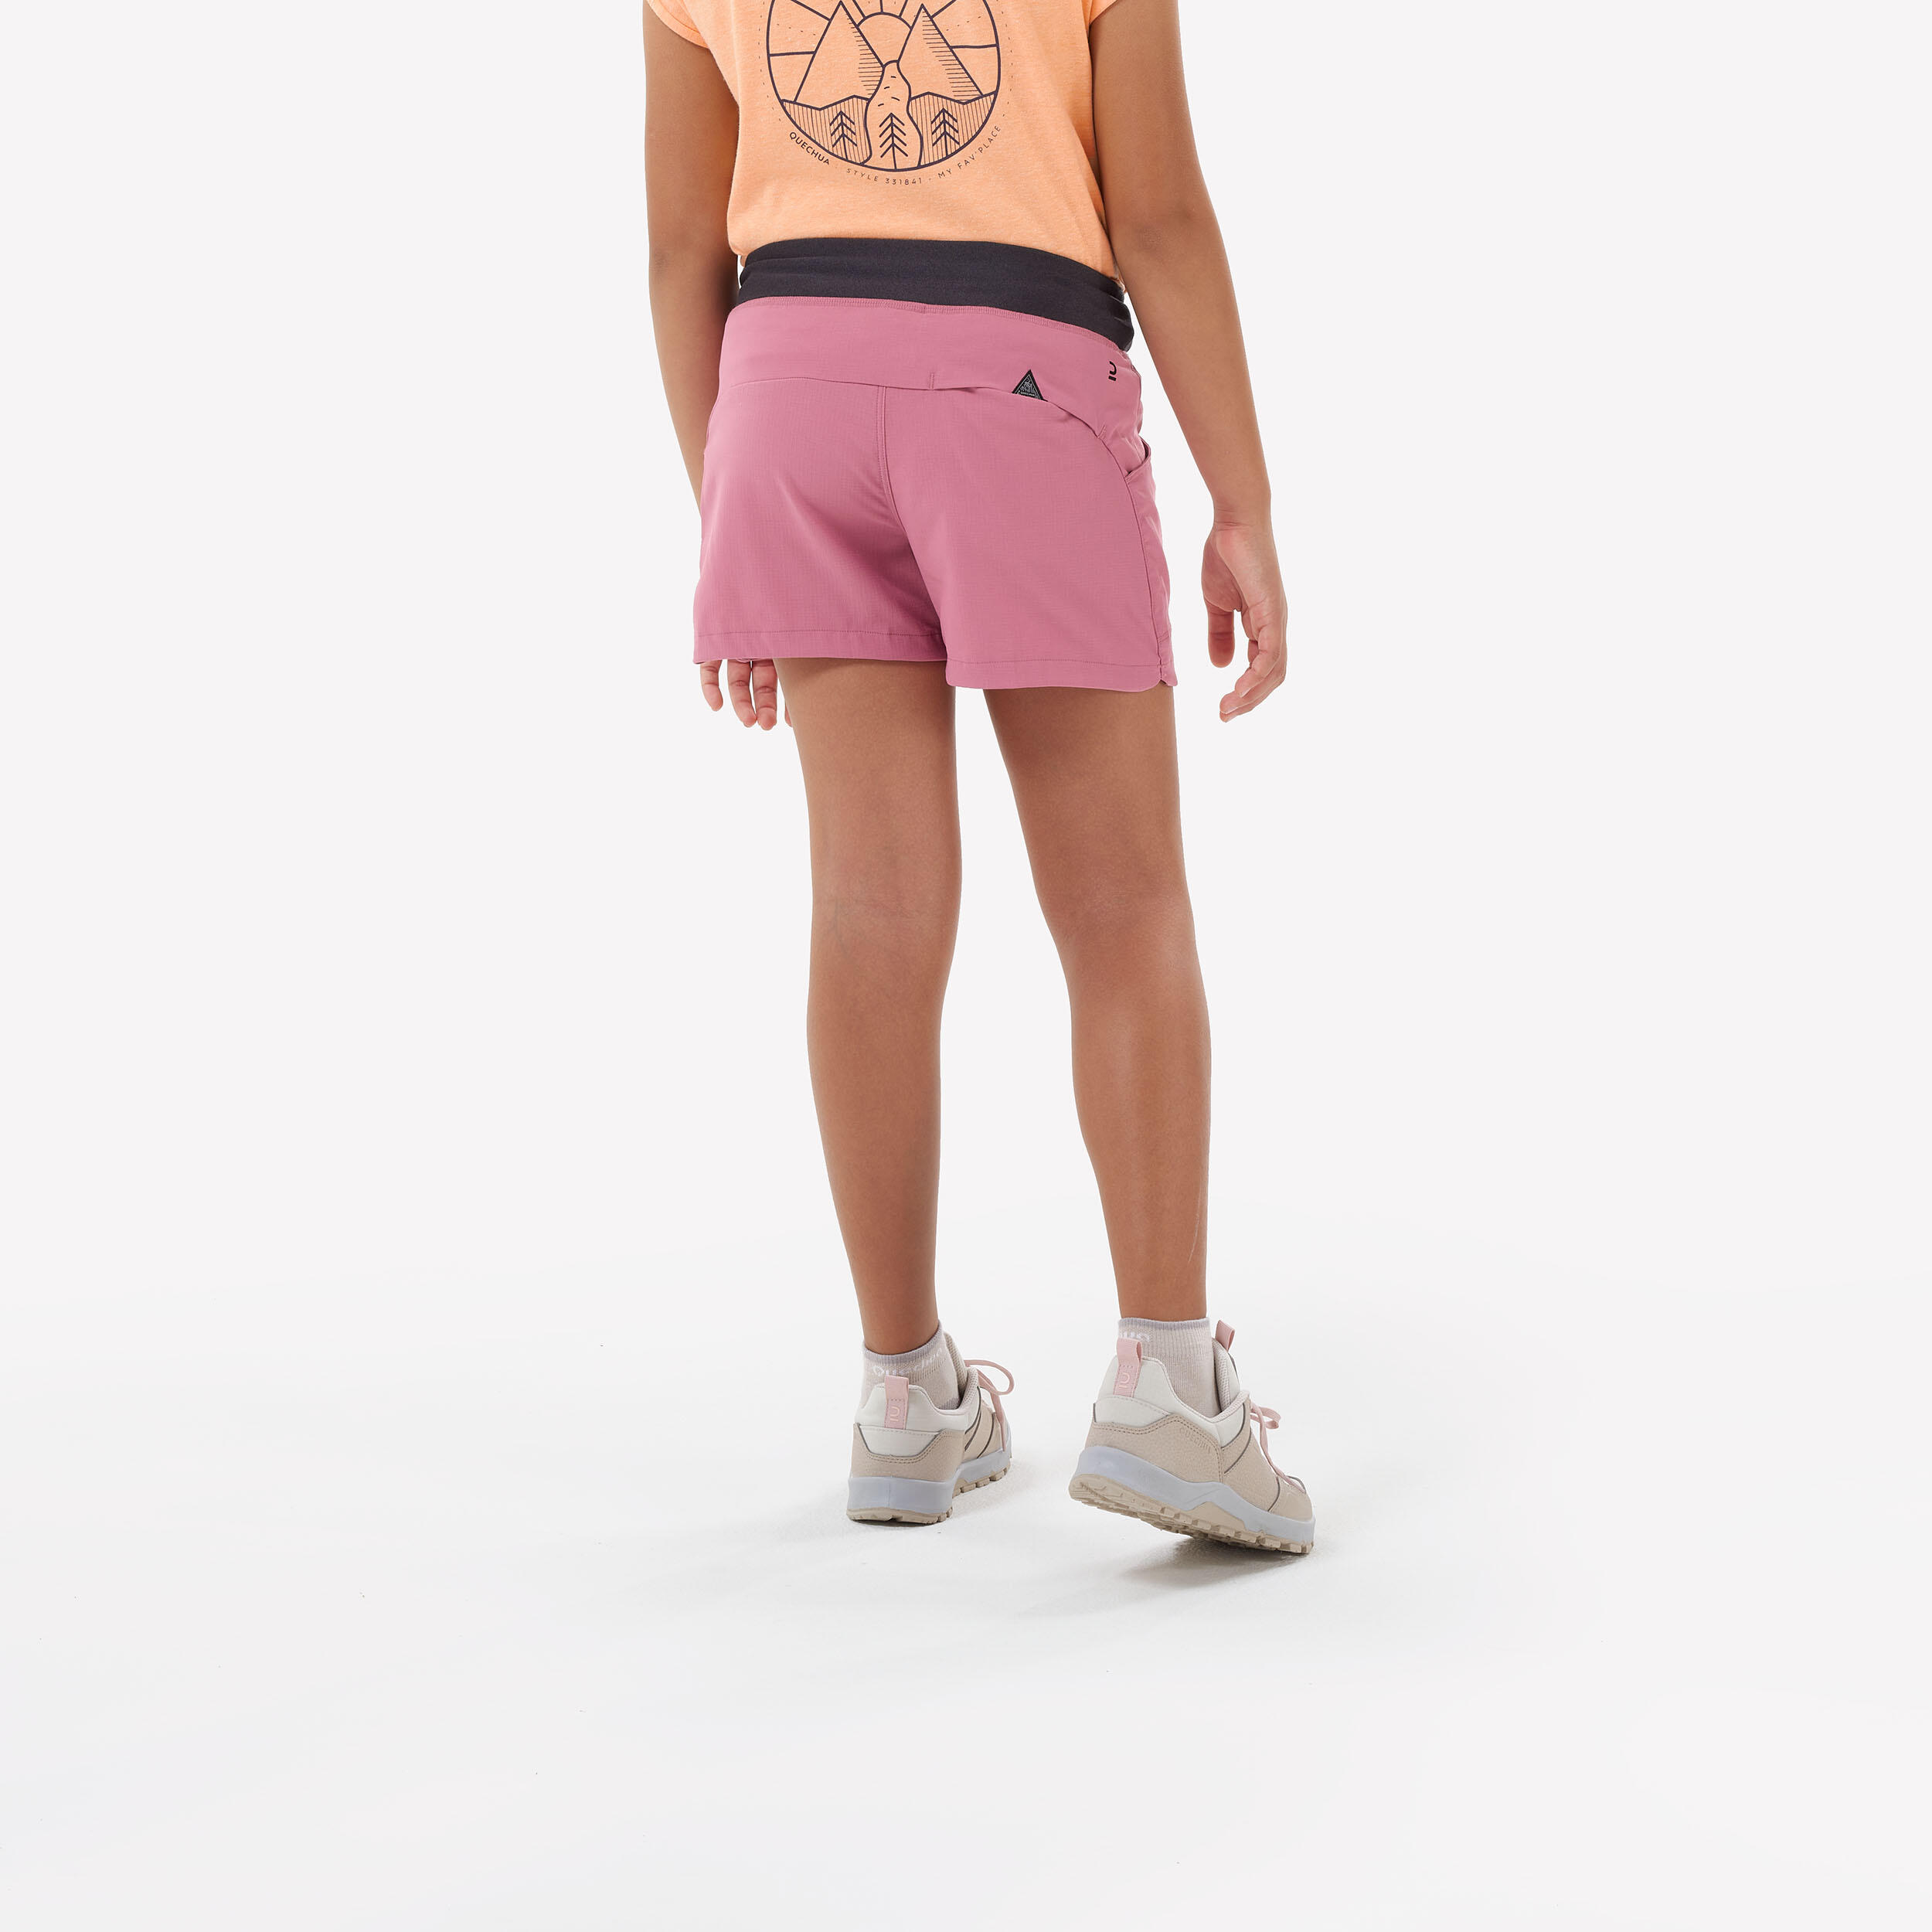 Kids’ Hiking Shorts - MH500 Ages 7-15 - Pink 3/9